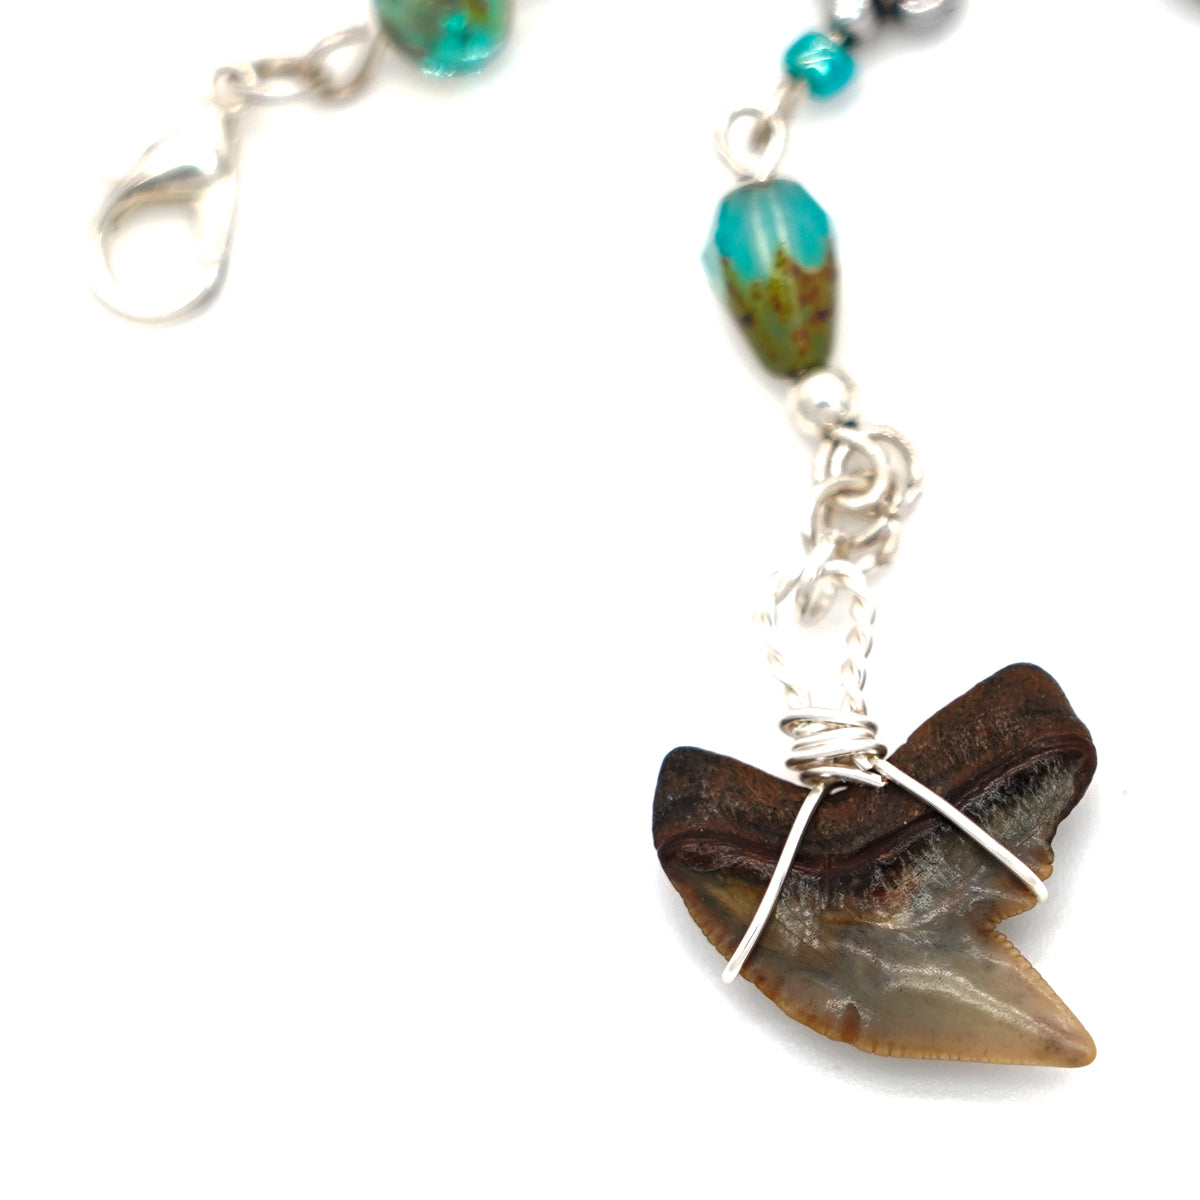 Fossilized Tiger Shark Tooth Charm Bracelet with Czech Glass & Wood